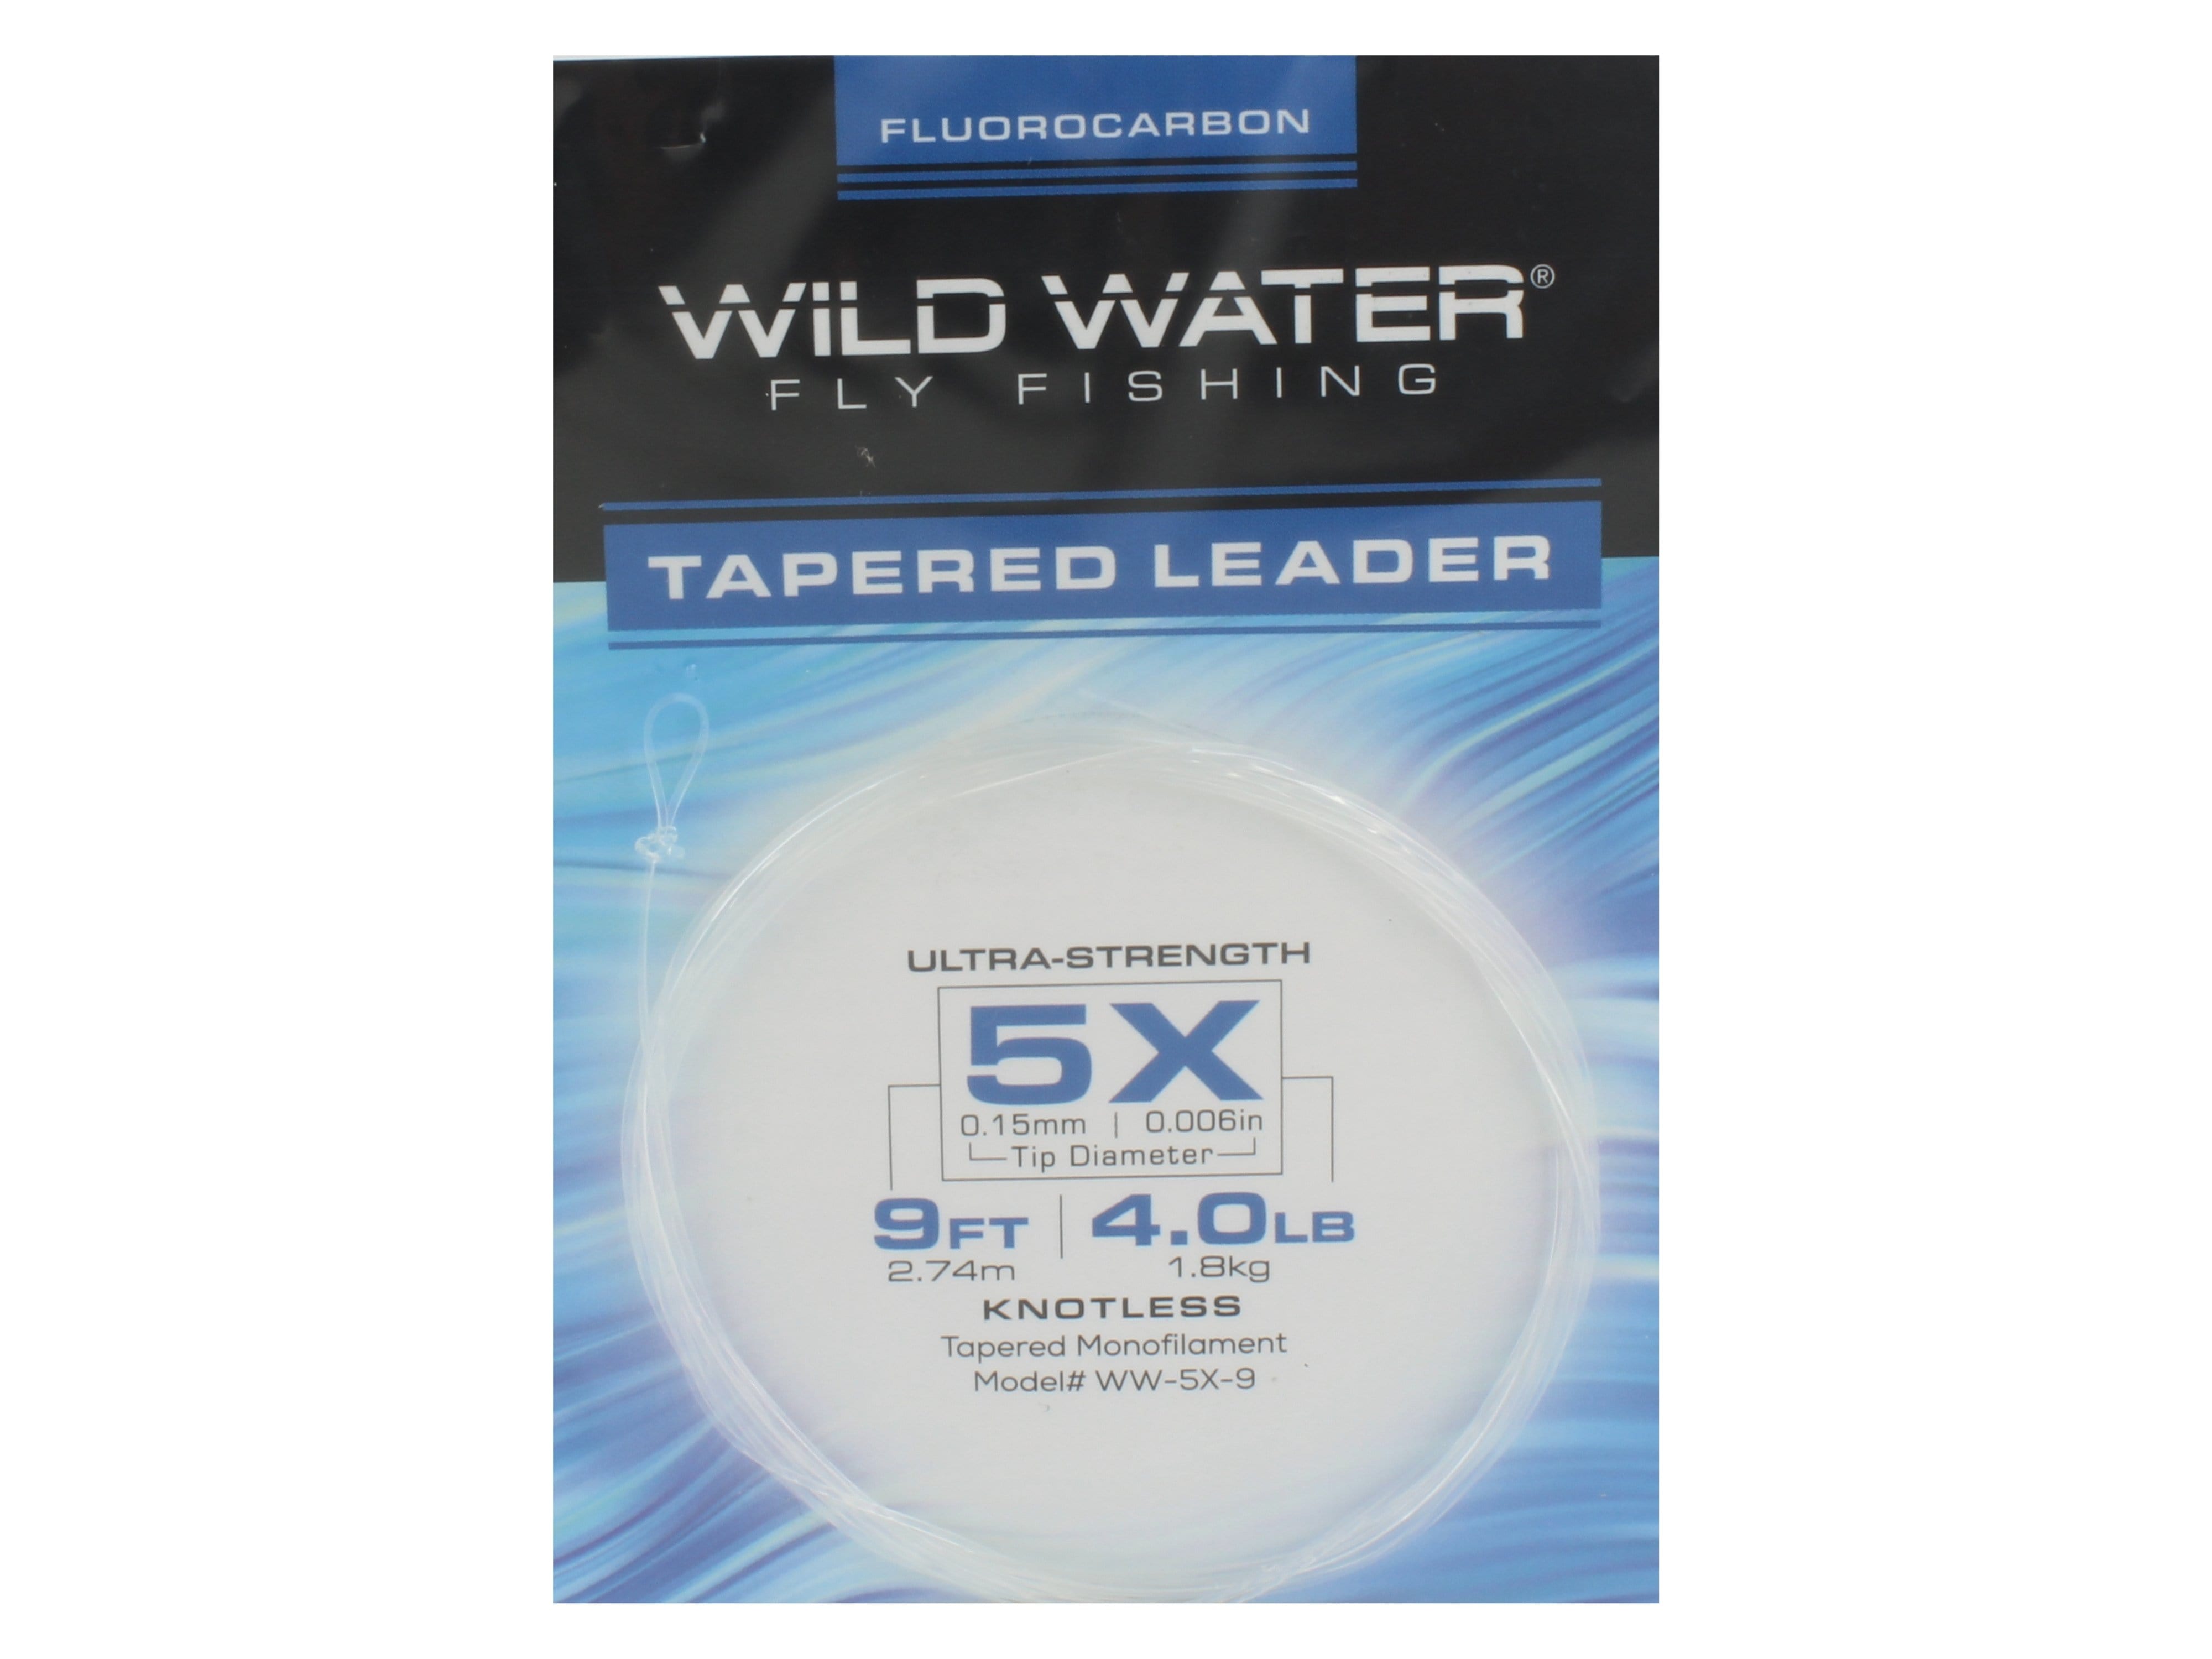 Wild Water Fly Fishing Fluorocarbon Leader 5X, 9', 3 Pack – Gotta